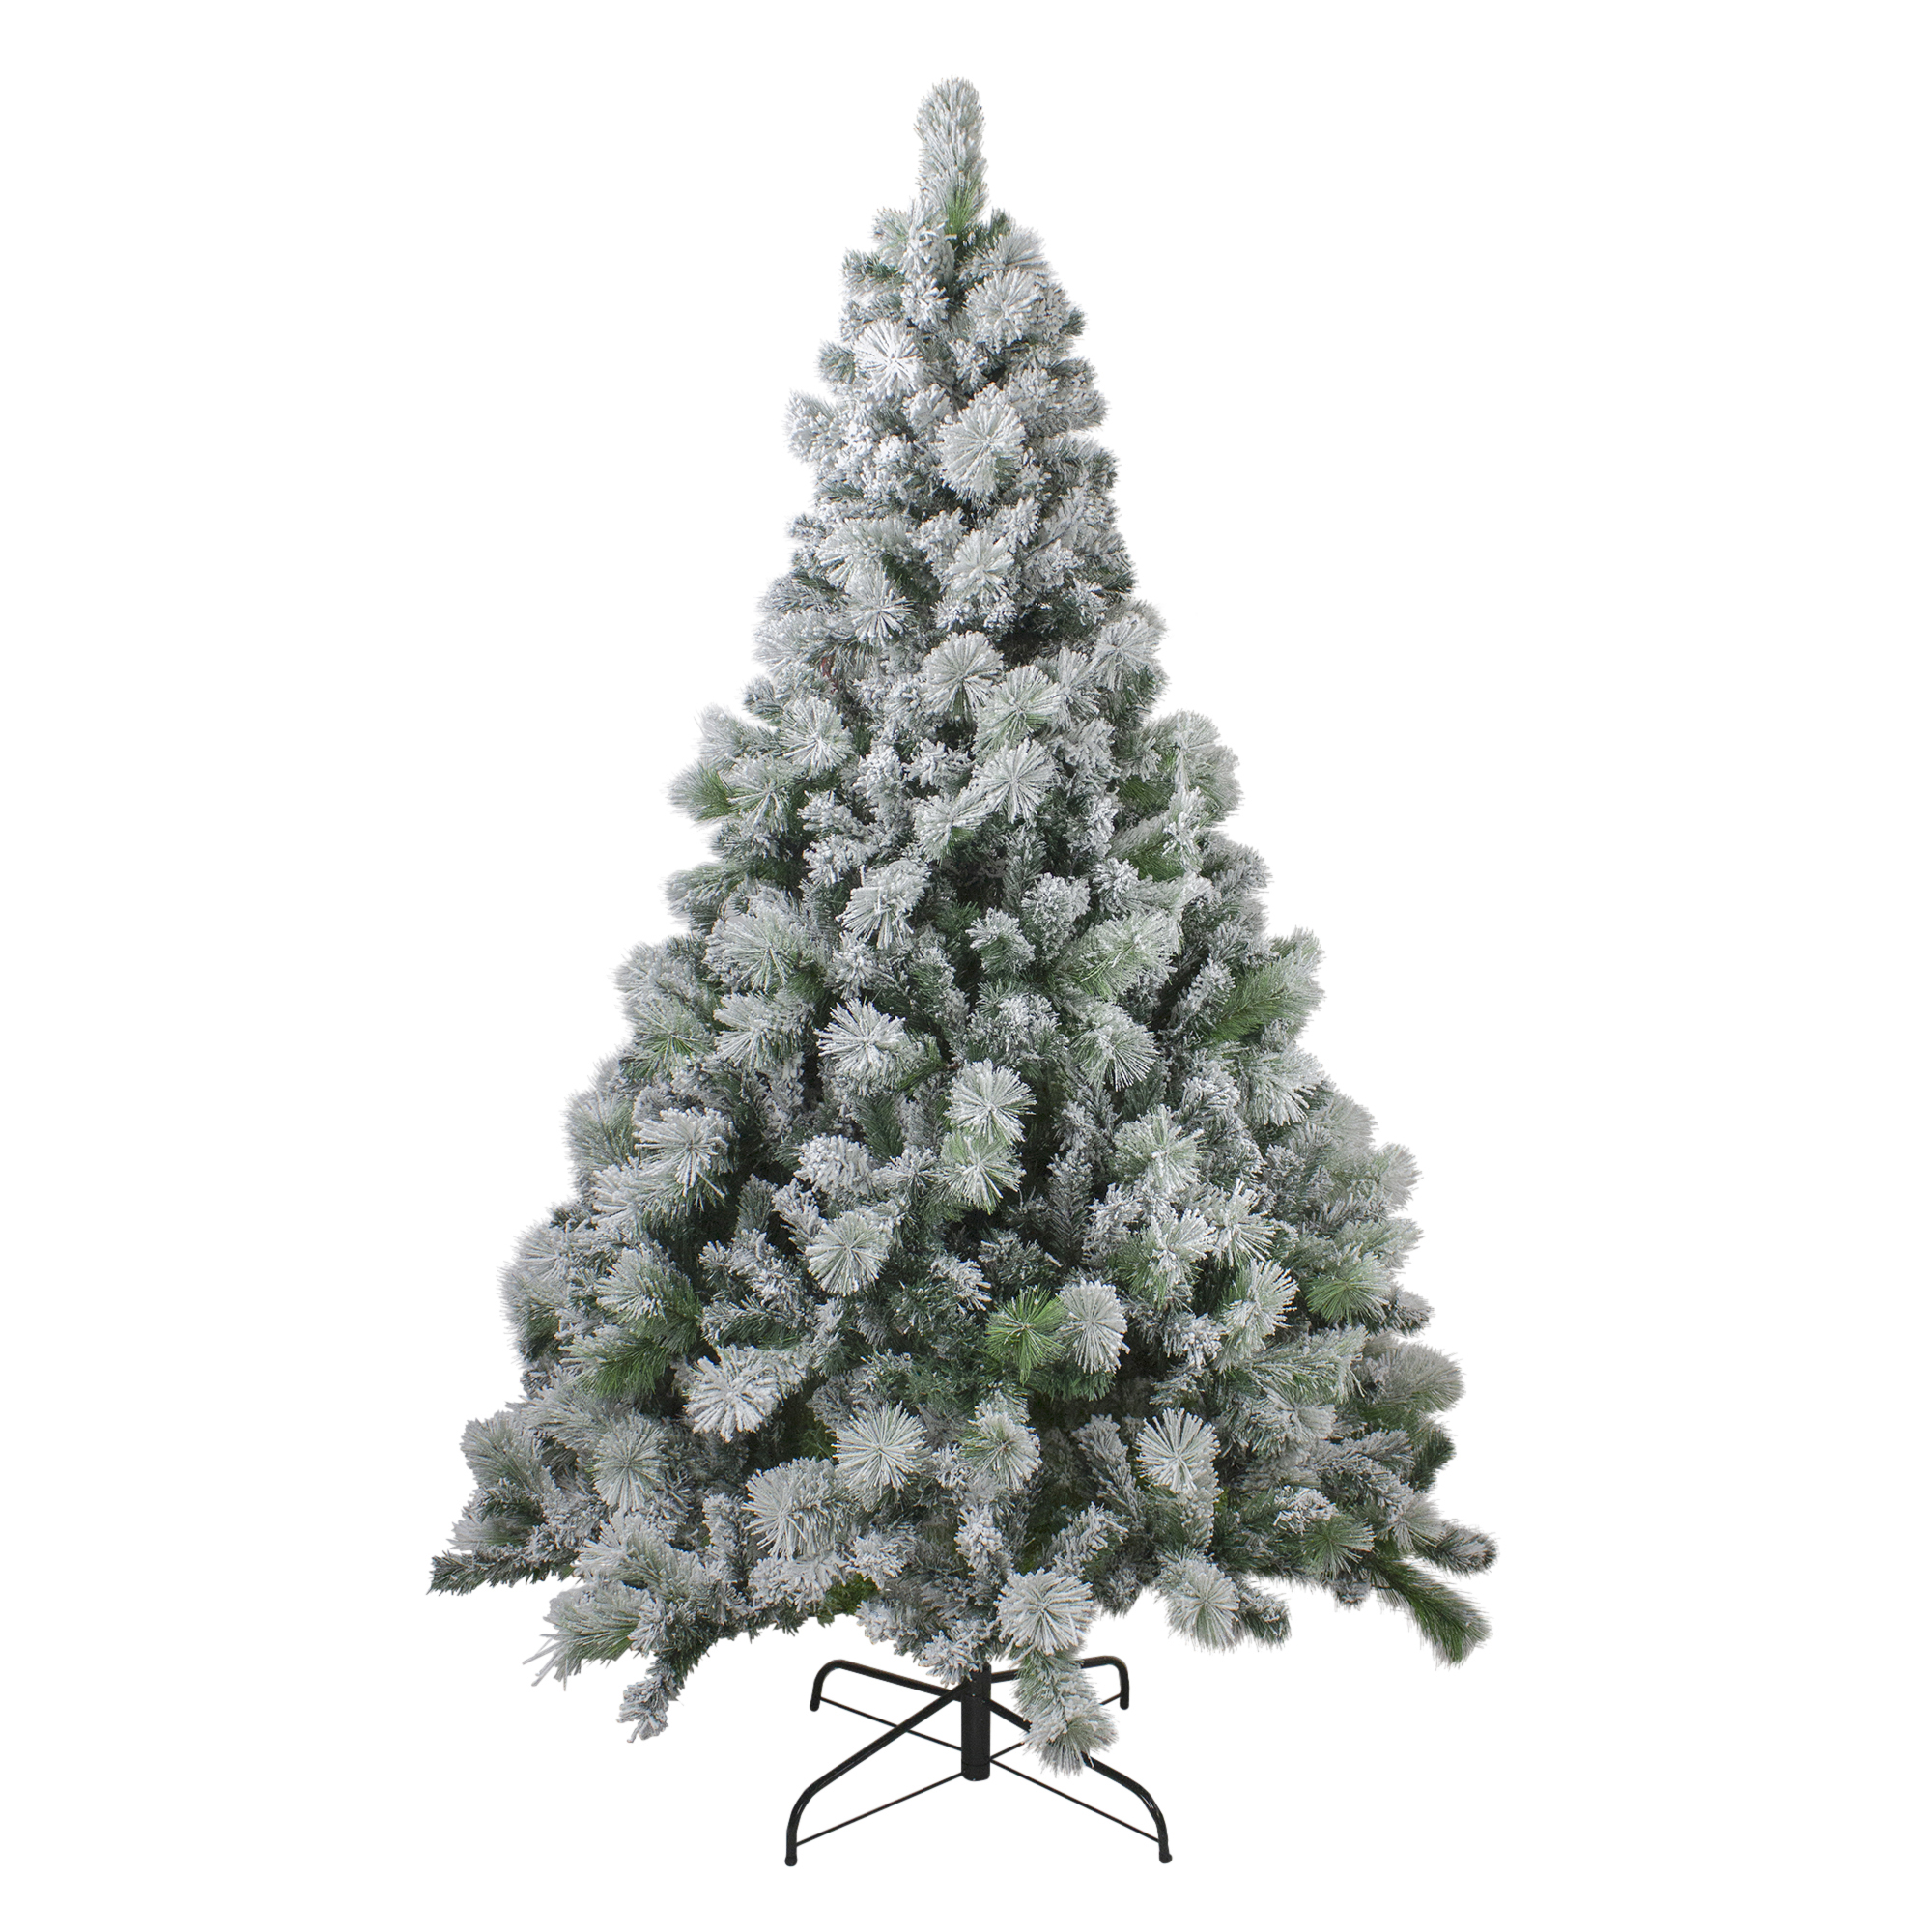 Northlight 6.5' Flocked Somerset Spruce Artificial Christmas Tree - Unlit - image 1 of 6